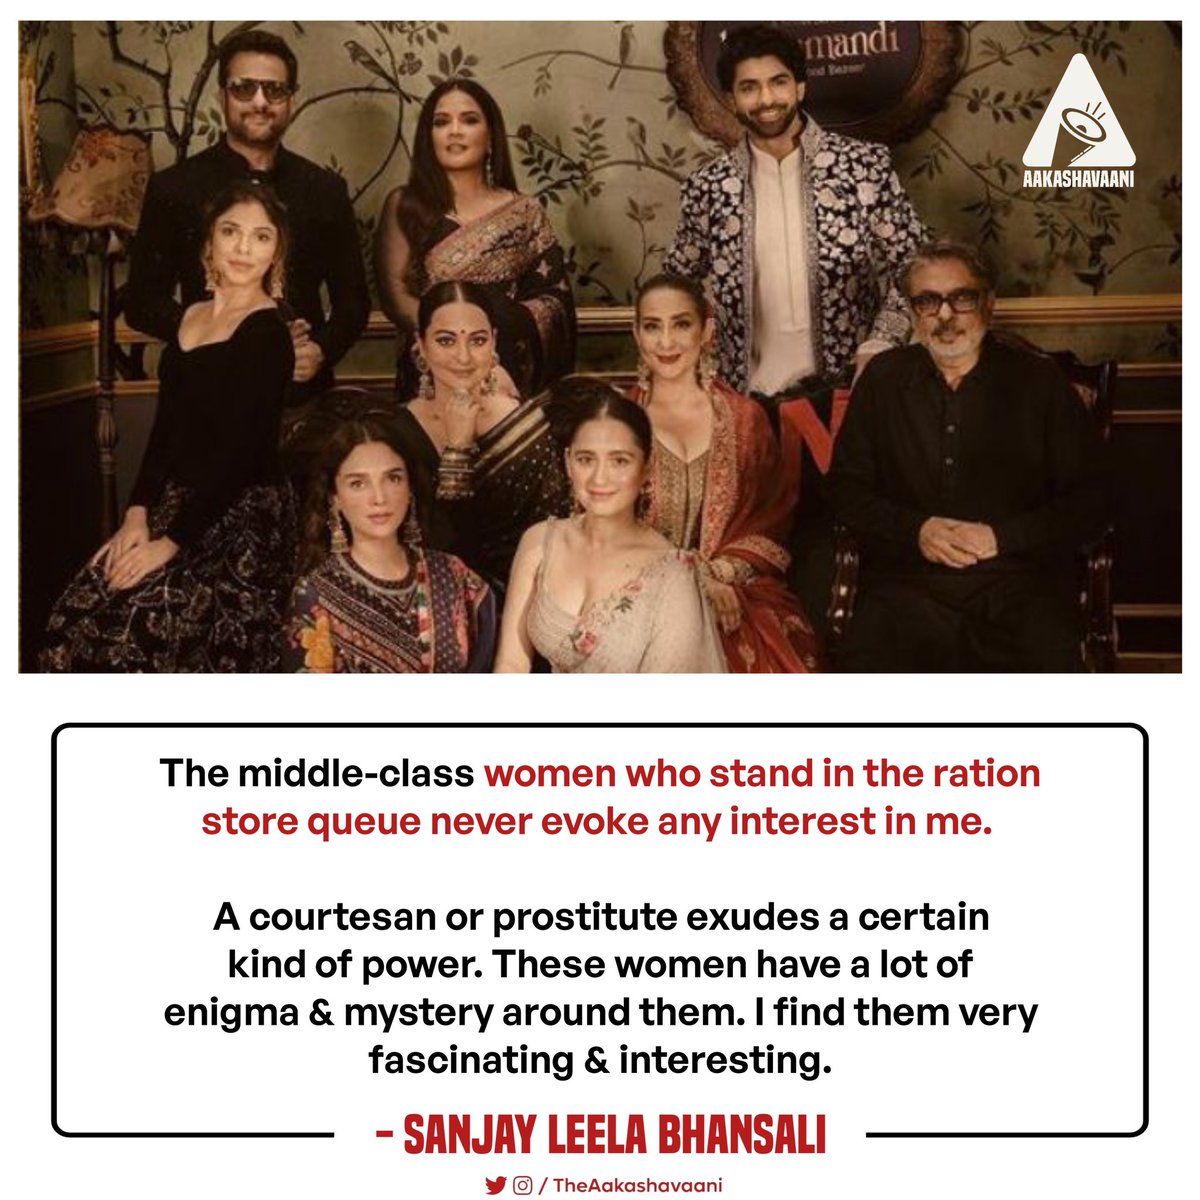 Imagine the outburst from a section of people had #SandeepVanga made a similar statement. #SanjayLeelaBhansali made this statement, and a section of people has no issues with it.